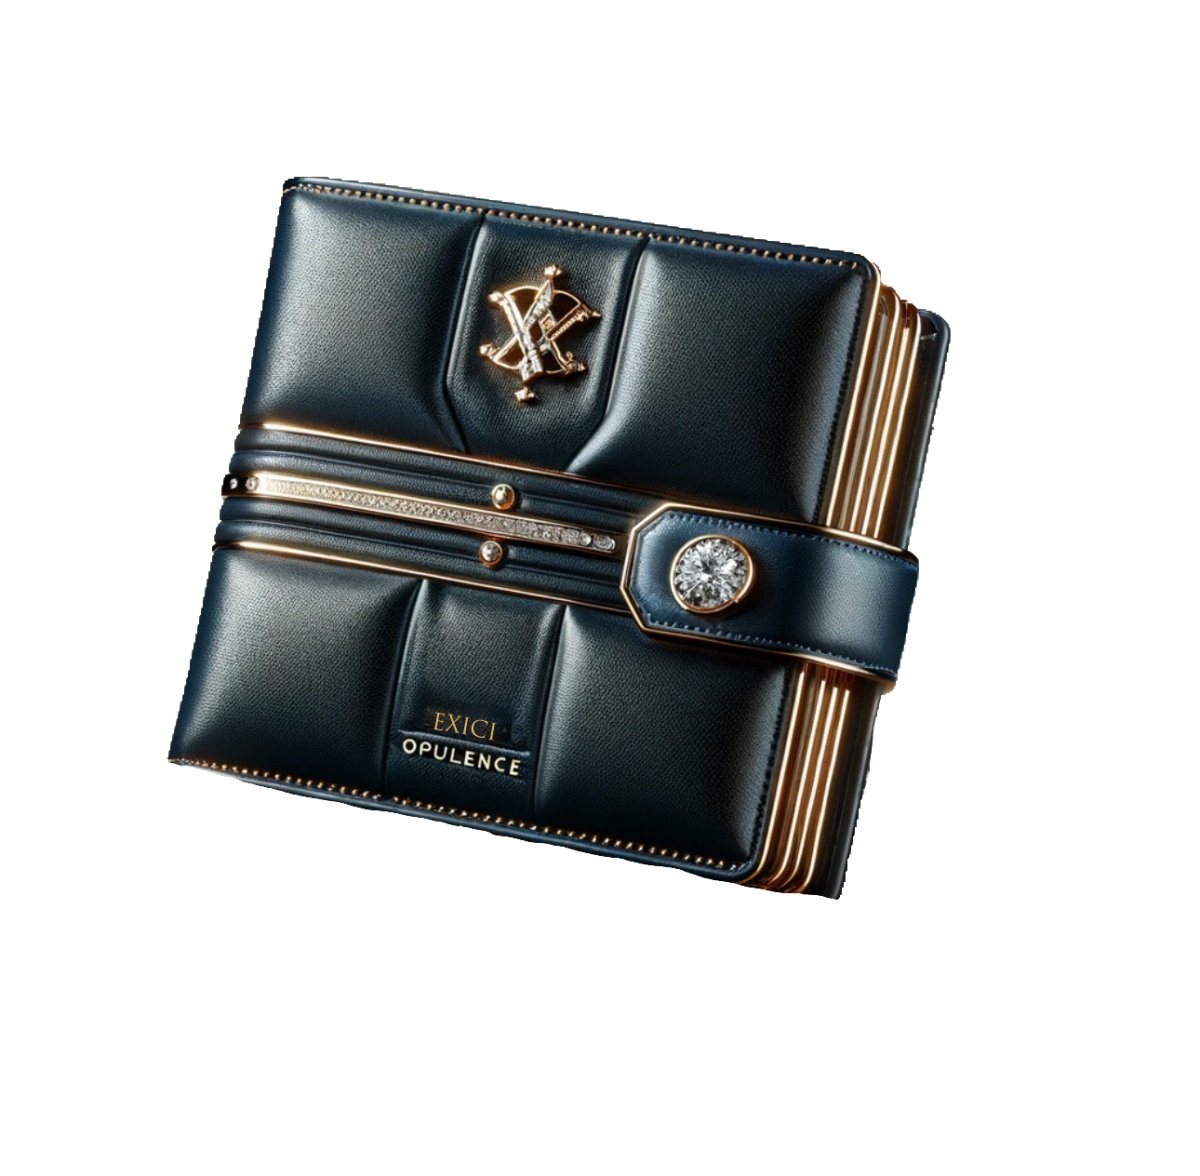 Opulence Wallet - Exici